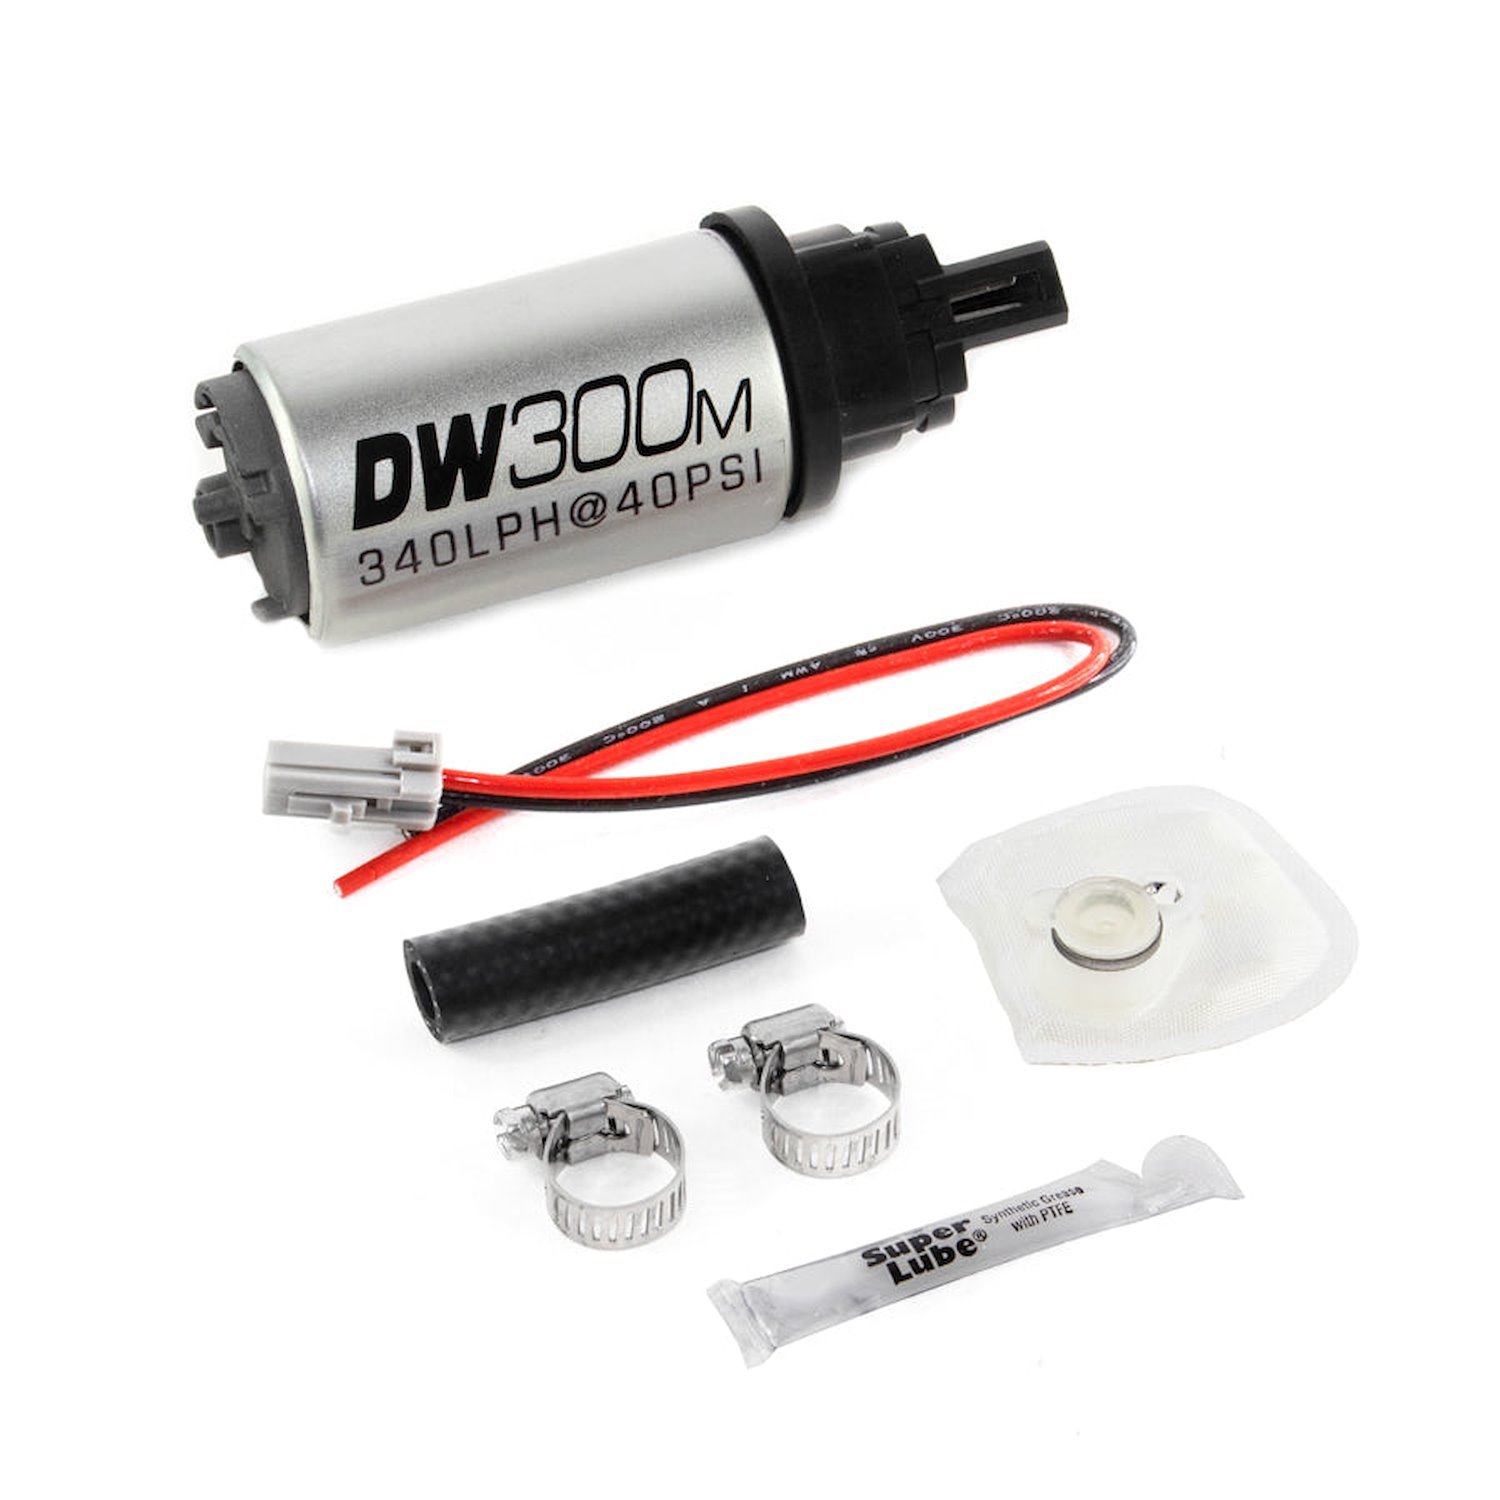 93051034 DW300M series 340lph Ford in-tank fuel pump w/ install kit for 05-10 ford Mustang V6/V8 (exc GT500)